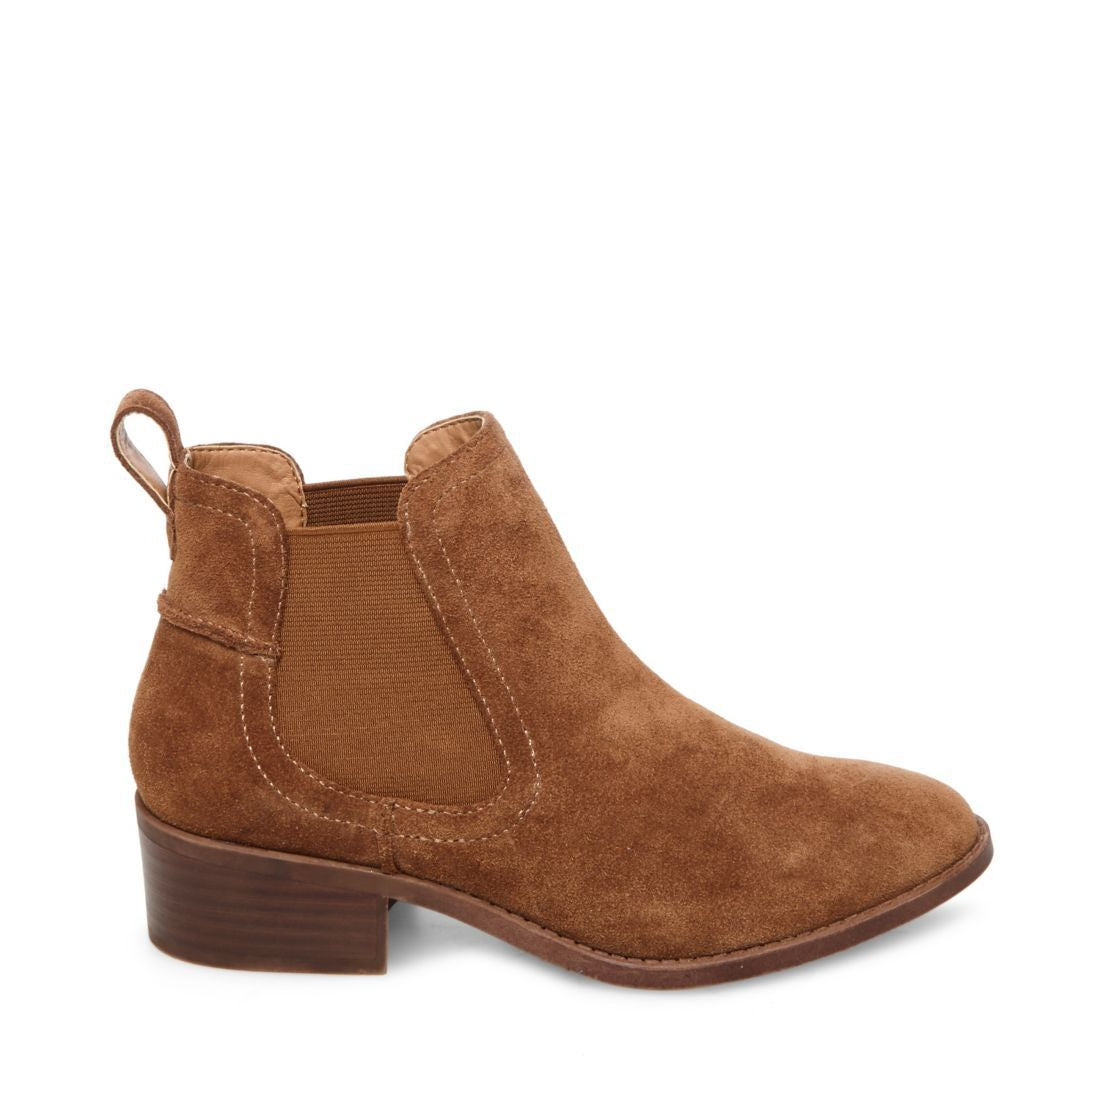 steve madden dicey booties